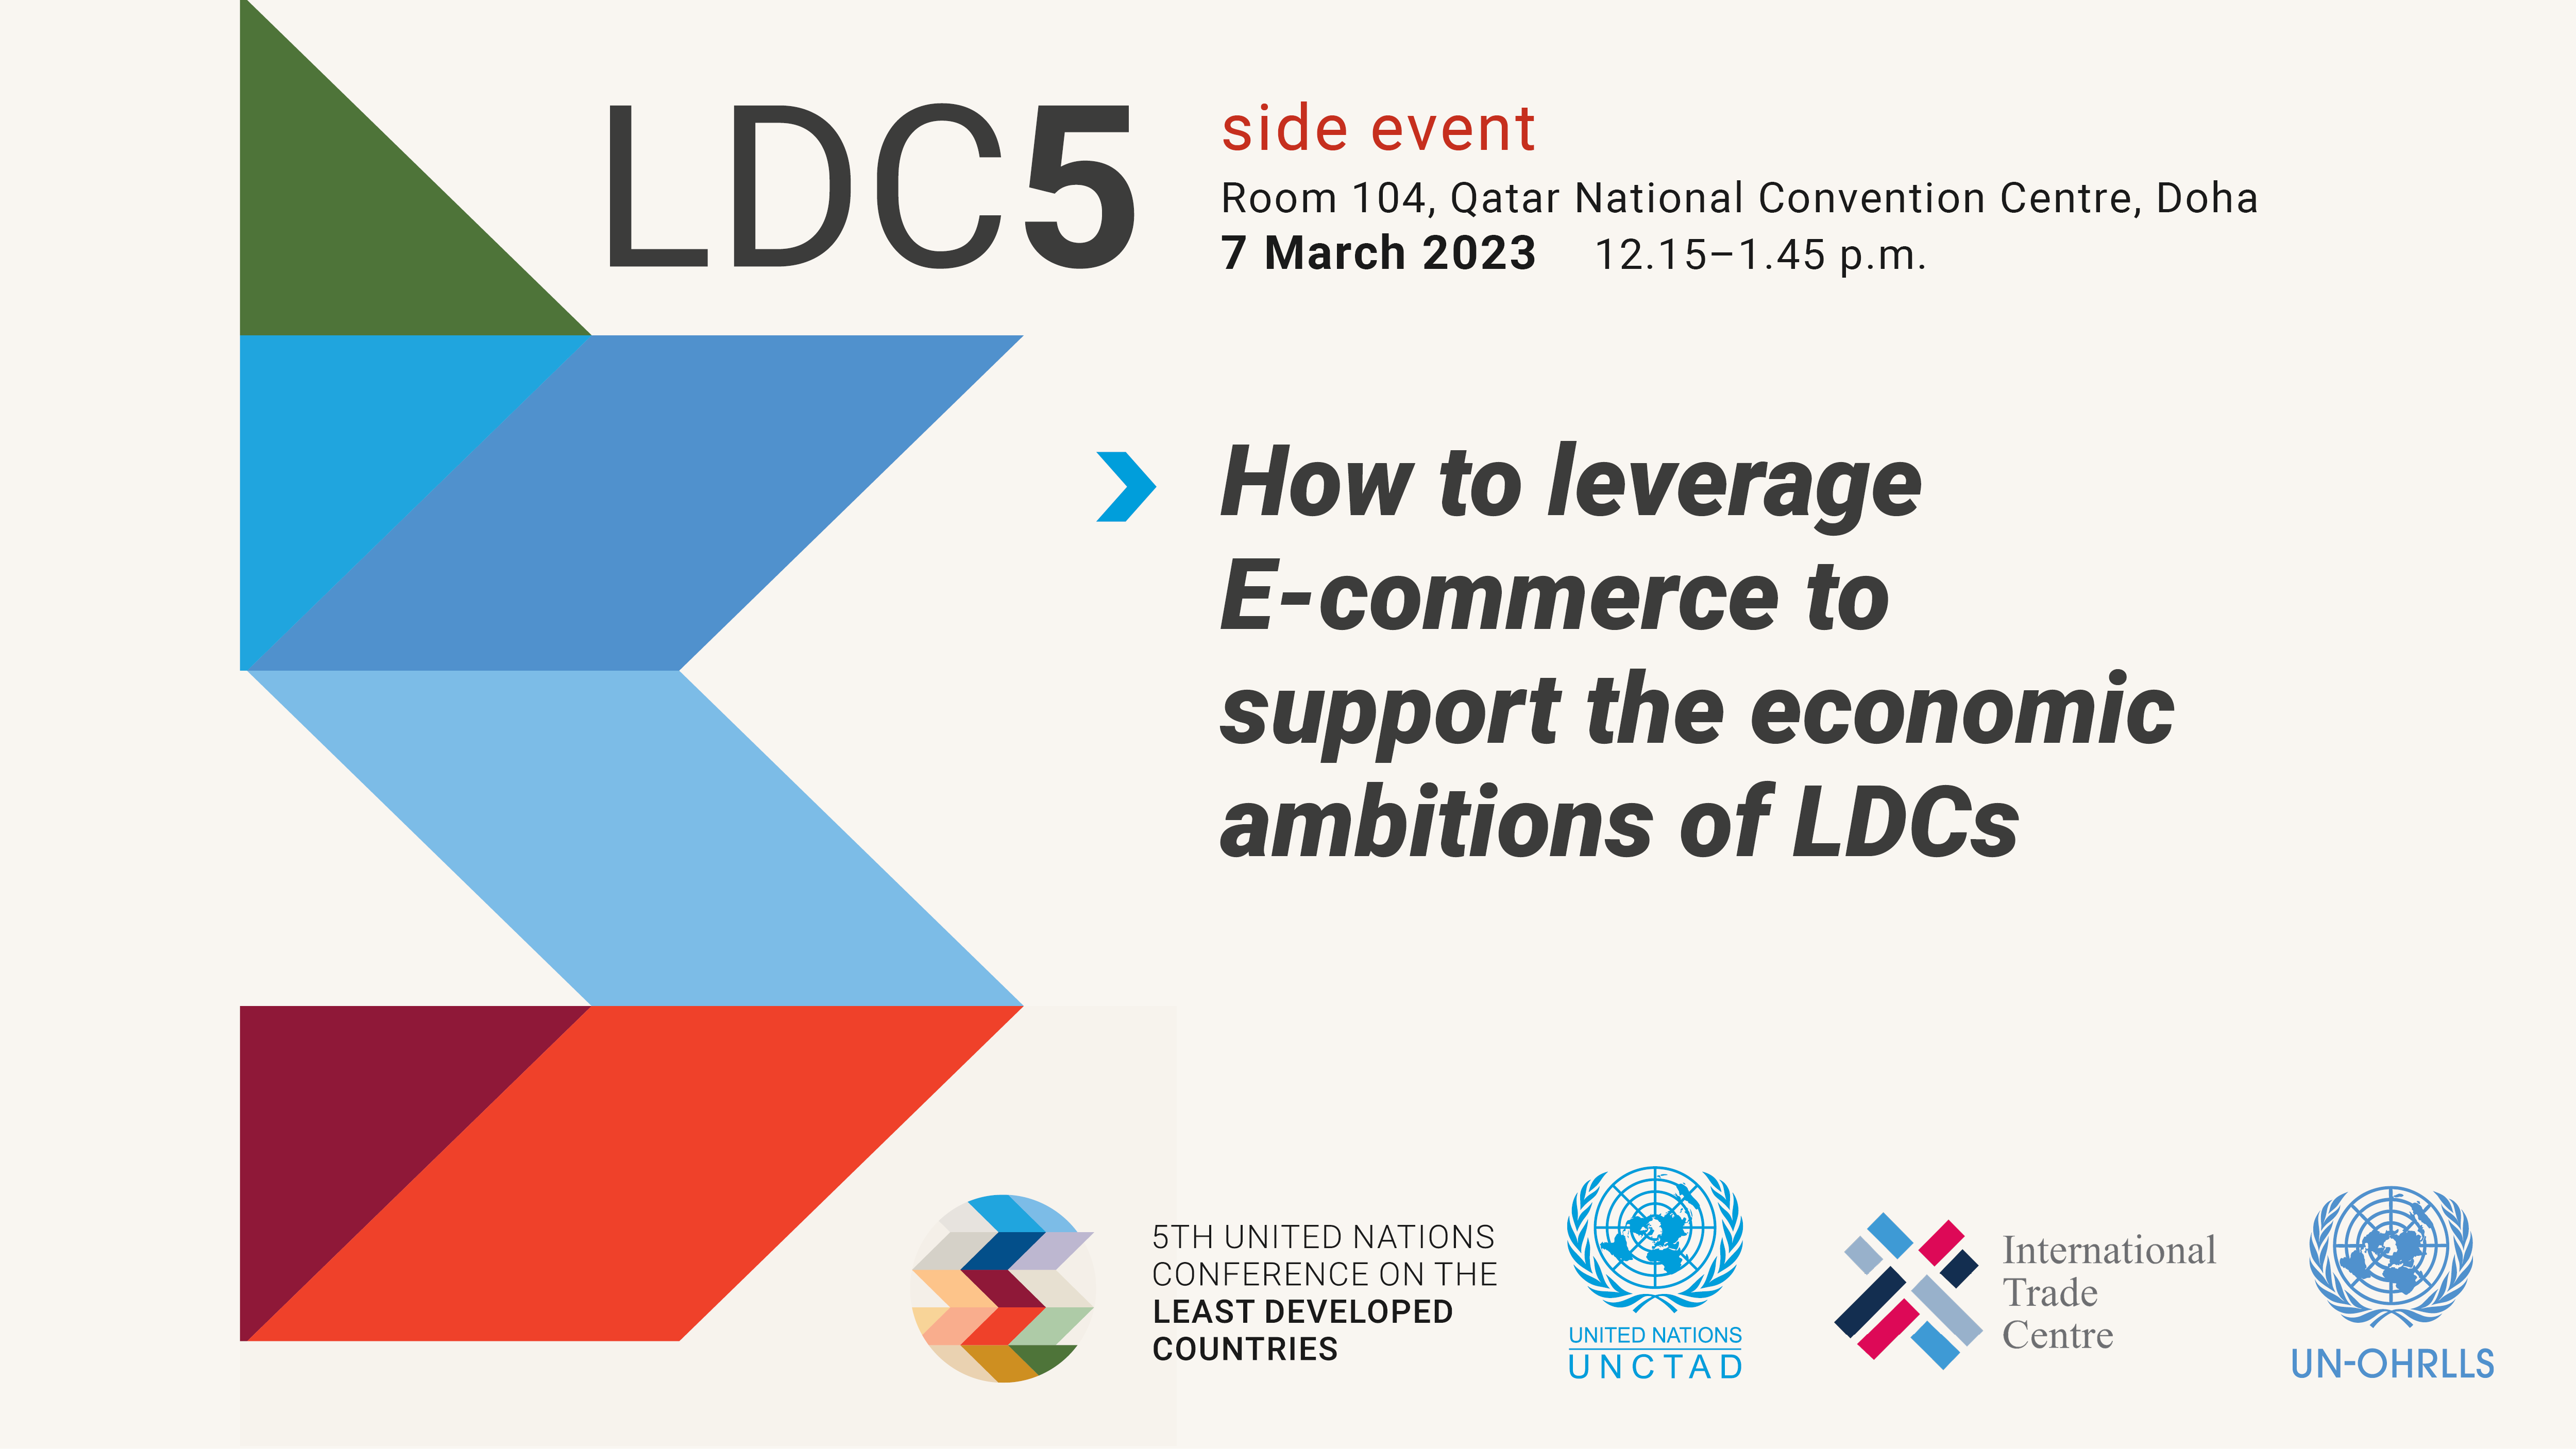 LDC5 side event: How to leverage E-commerce to support the economic ambitions of LDCs